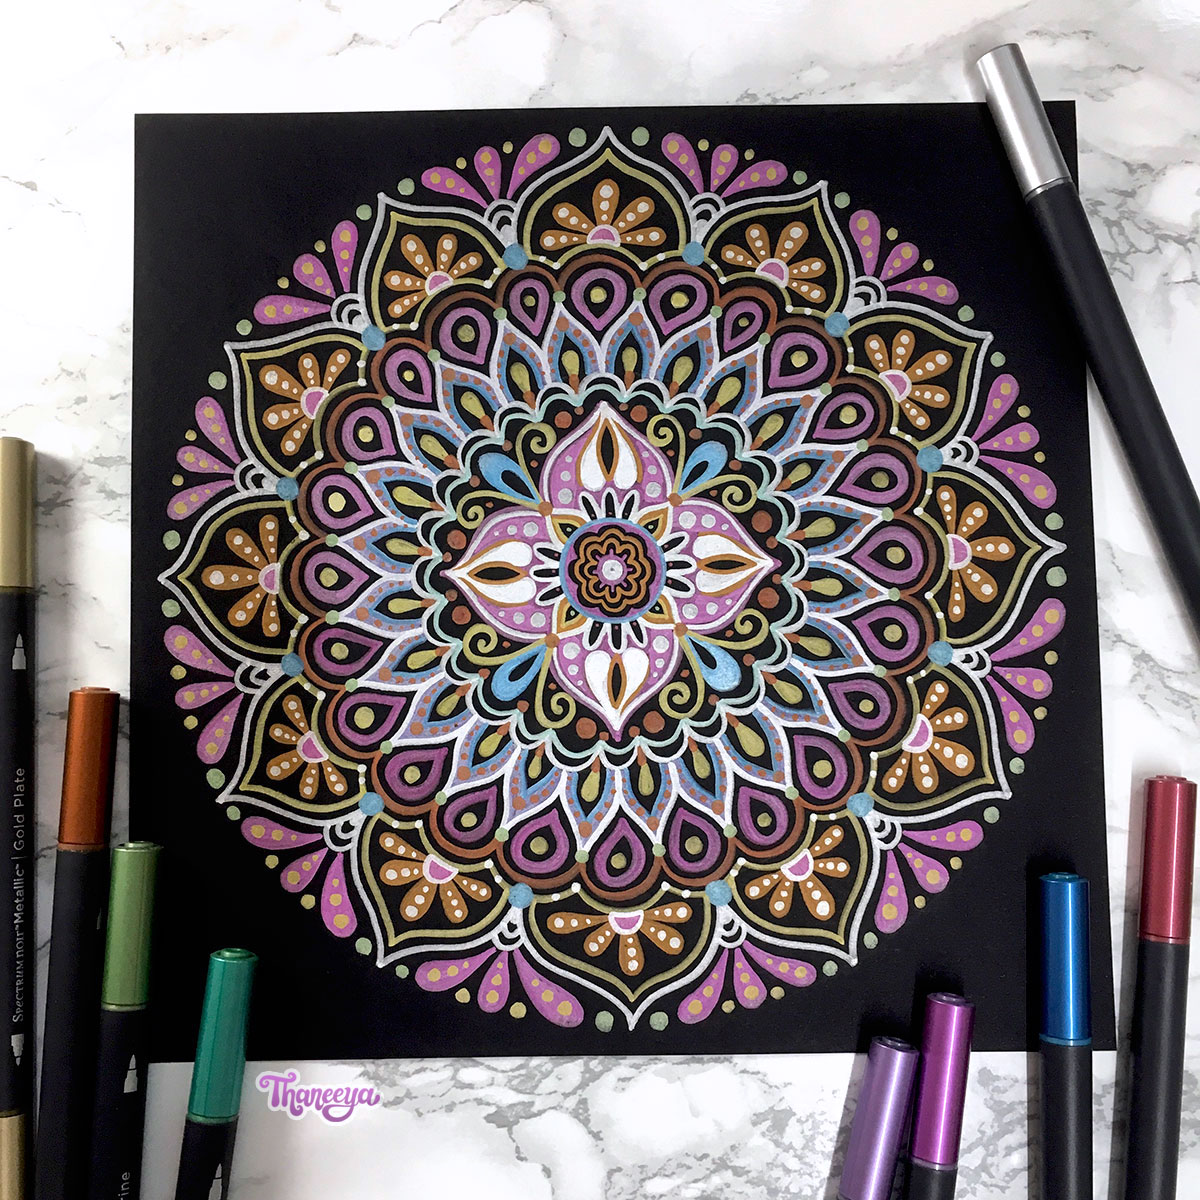 Metallic Pens - great on dark paper, or for a fancy style